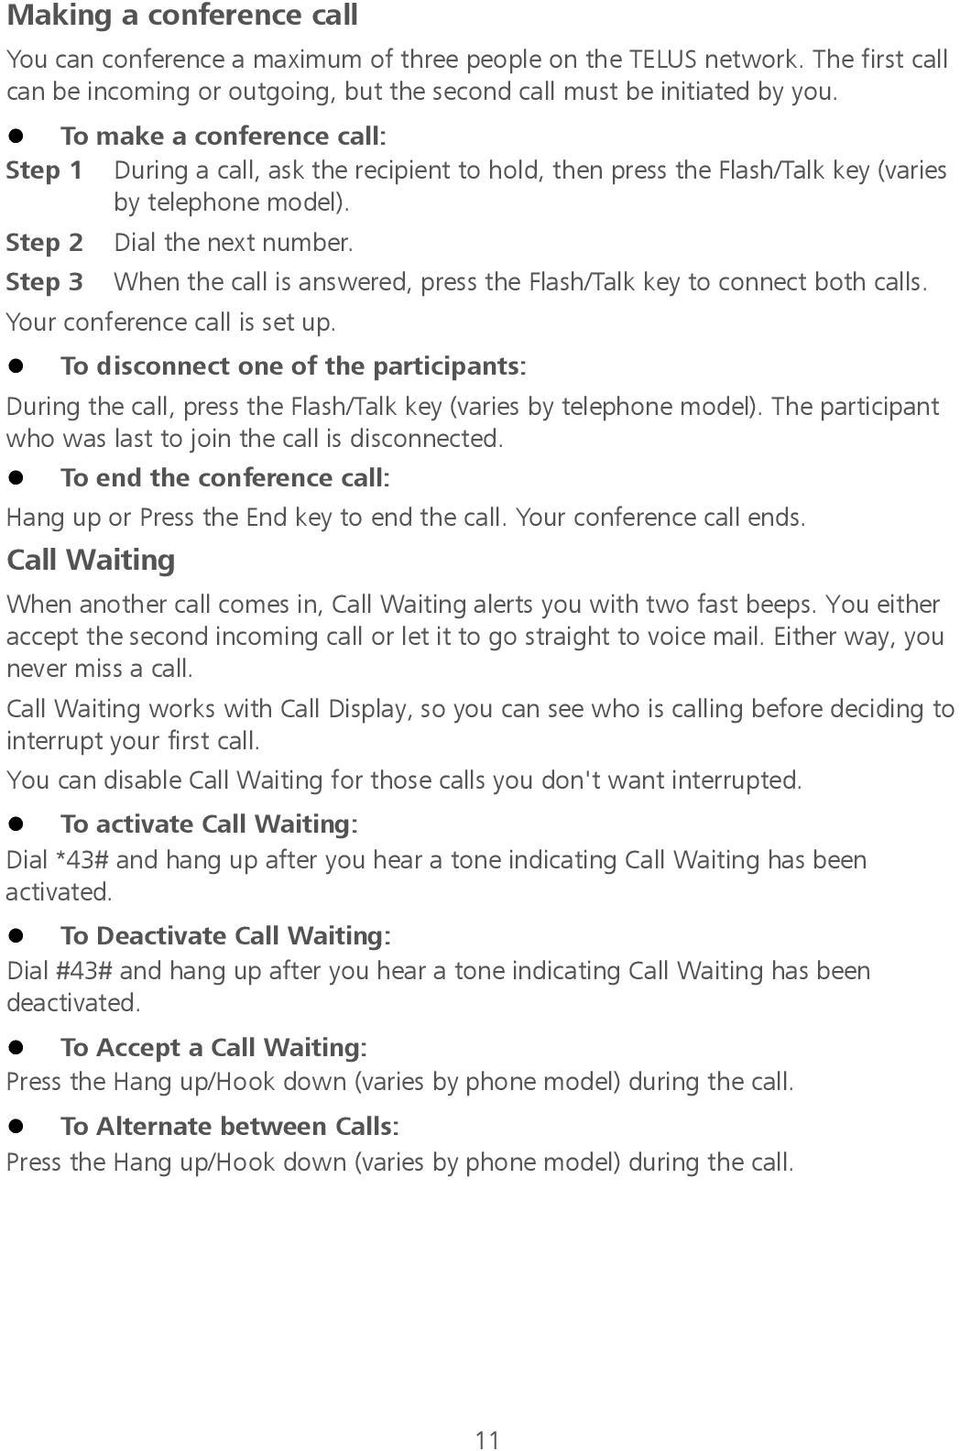 Step 3 When the call is answered, press the Flash/Talk key to connect both calls. Your conference call is set up.